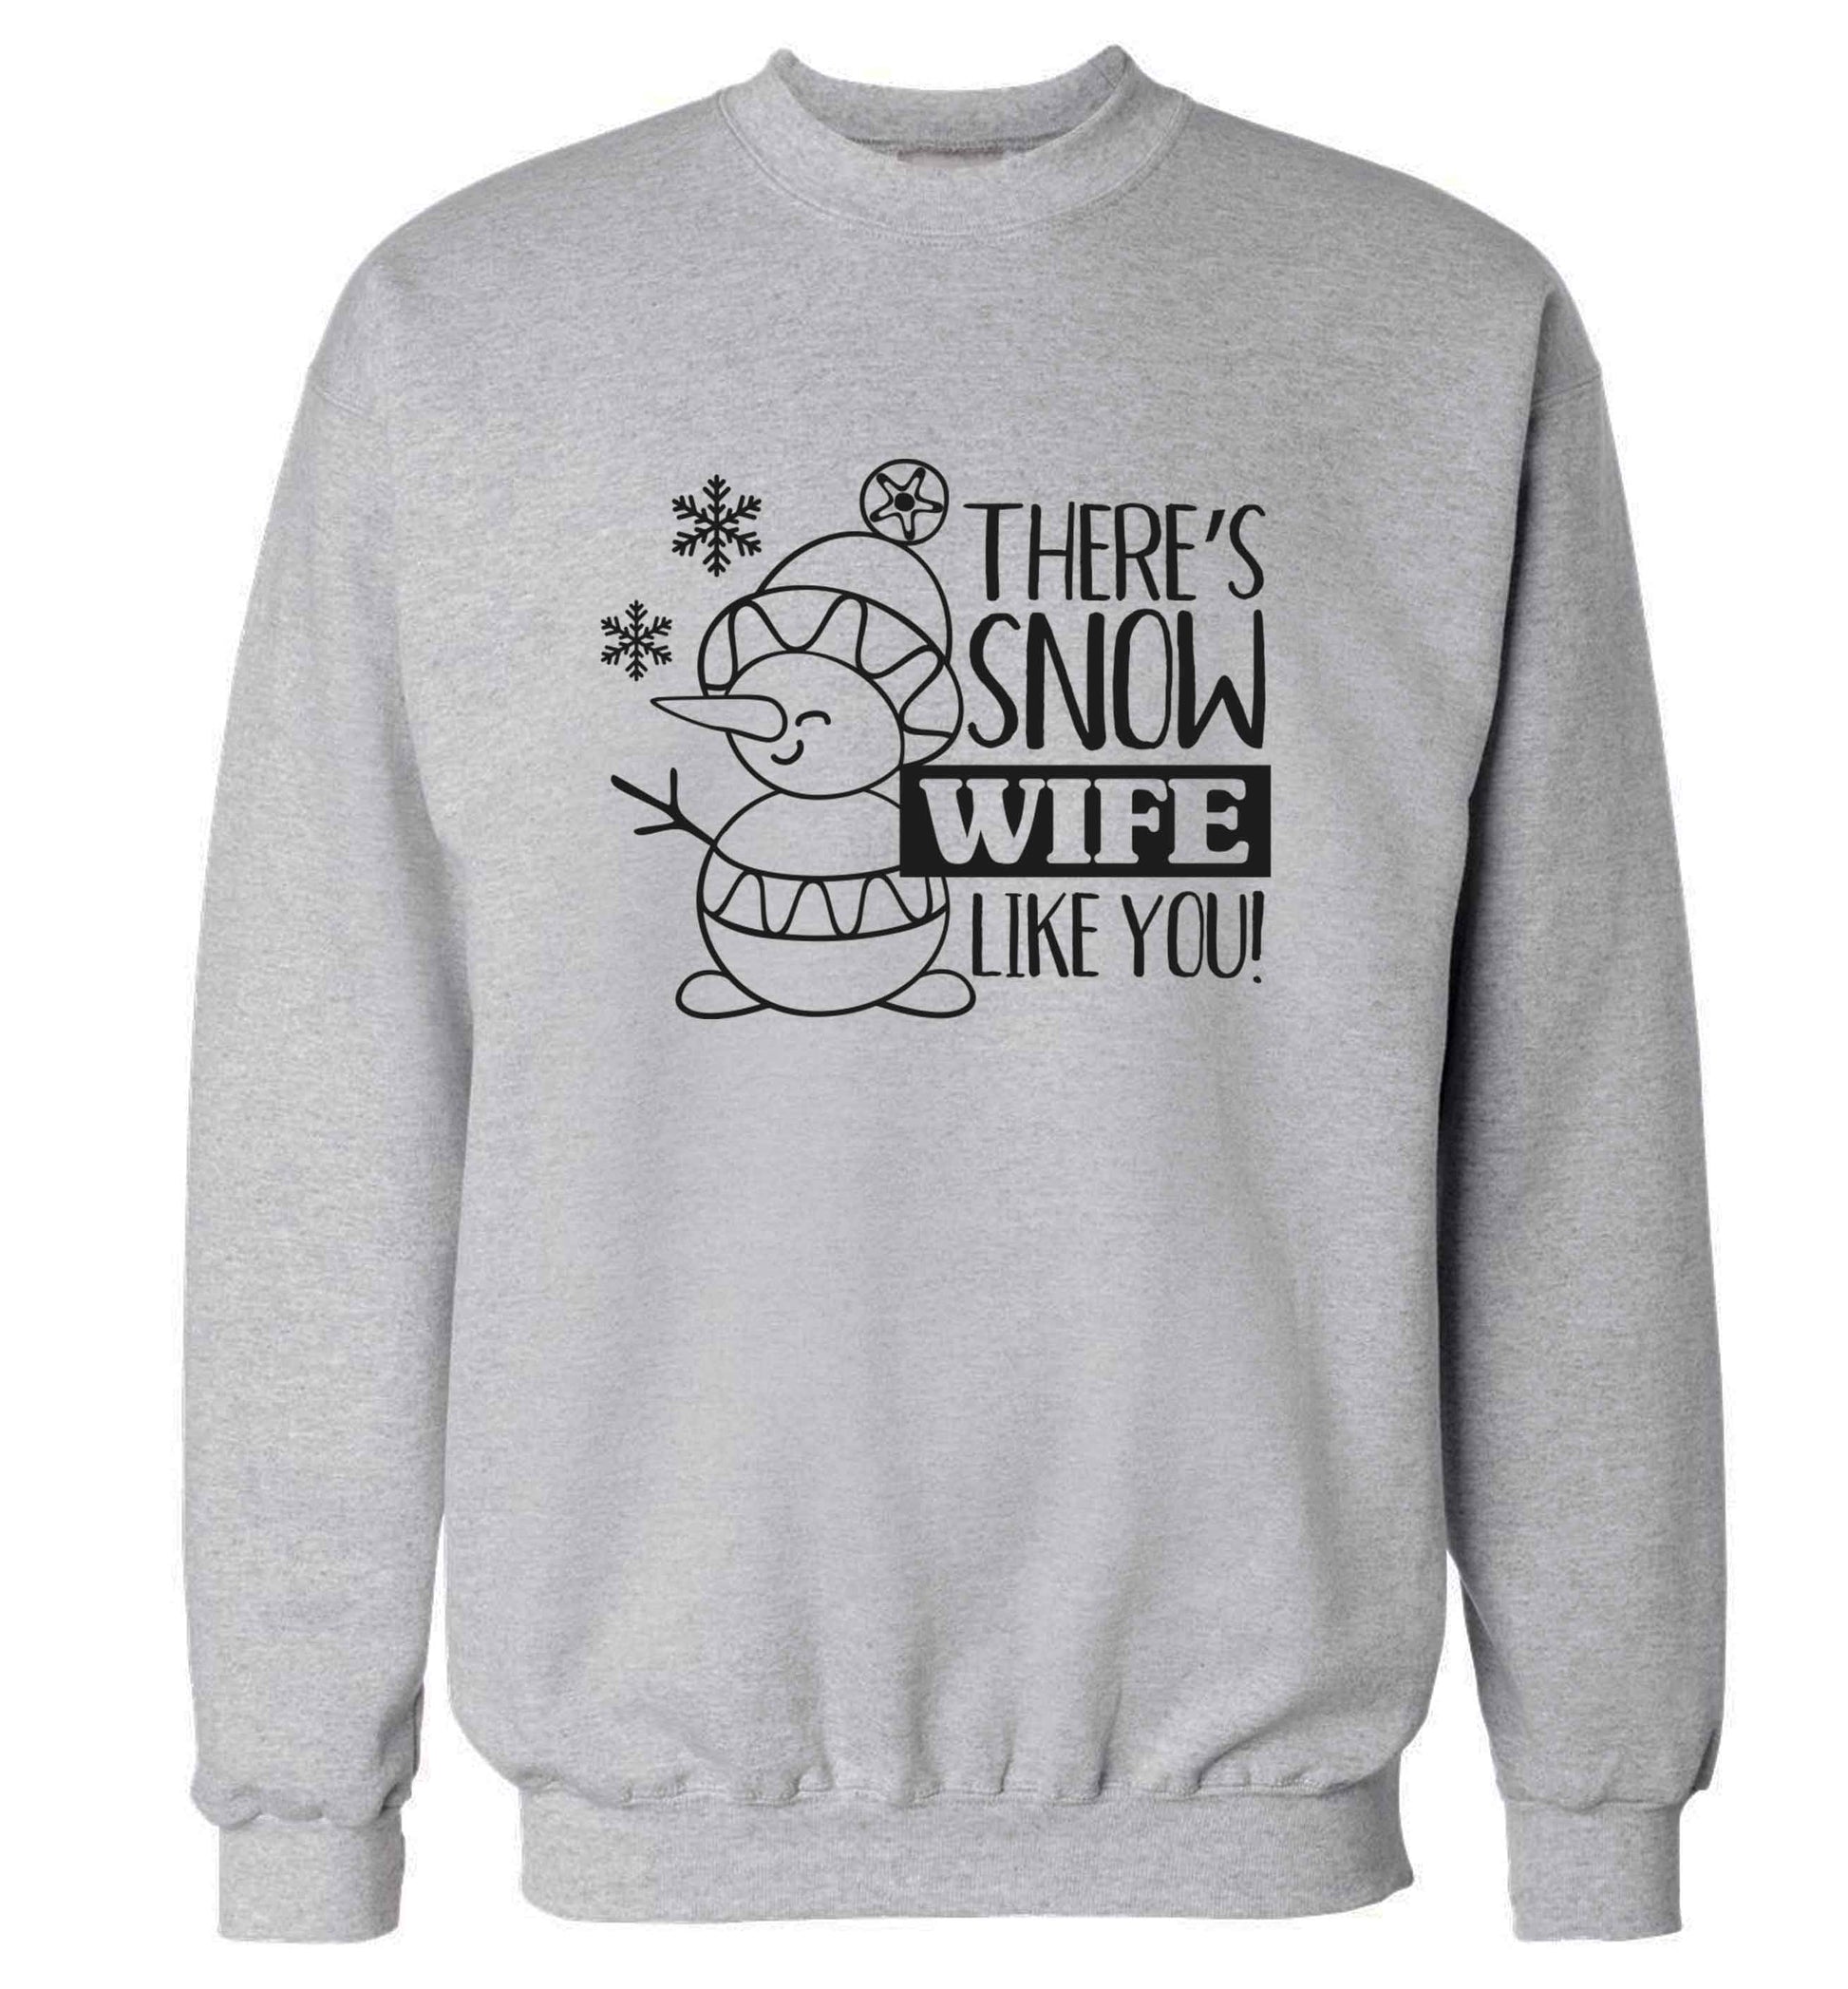 There's snow wife like you adult's unisex grey sweater 2XL